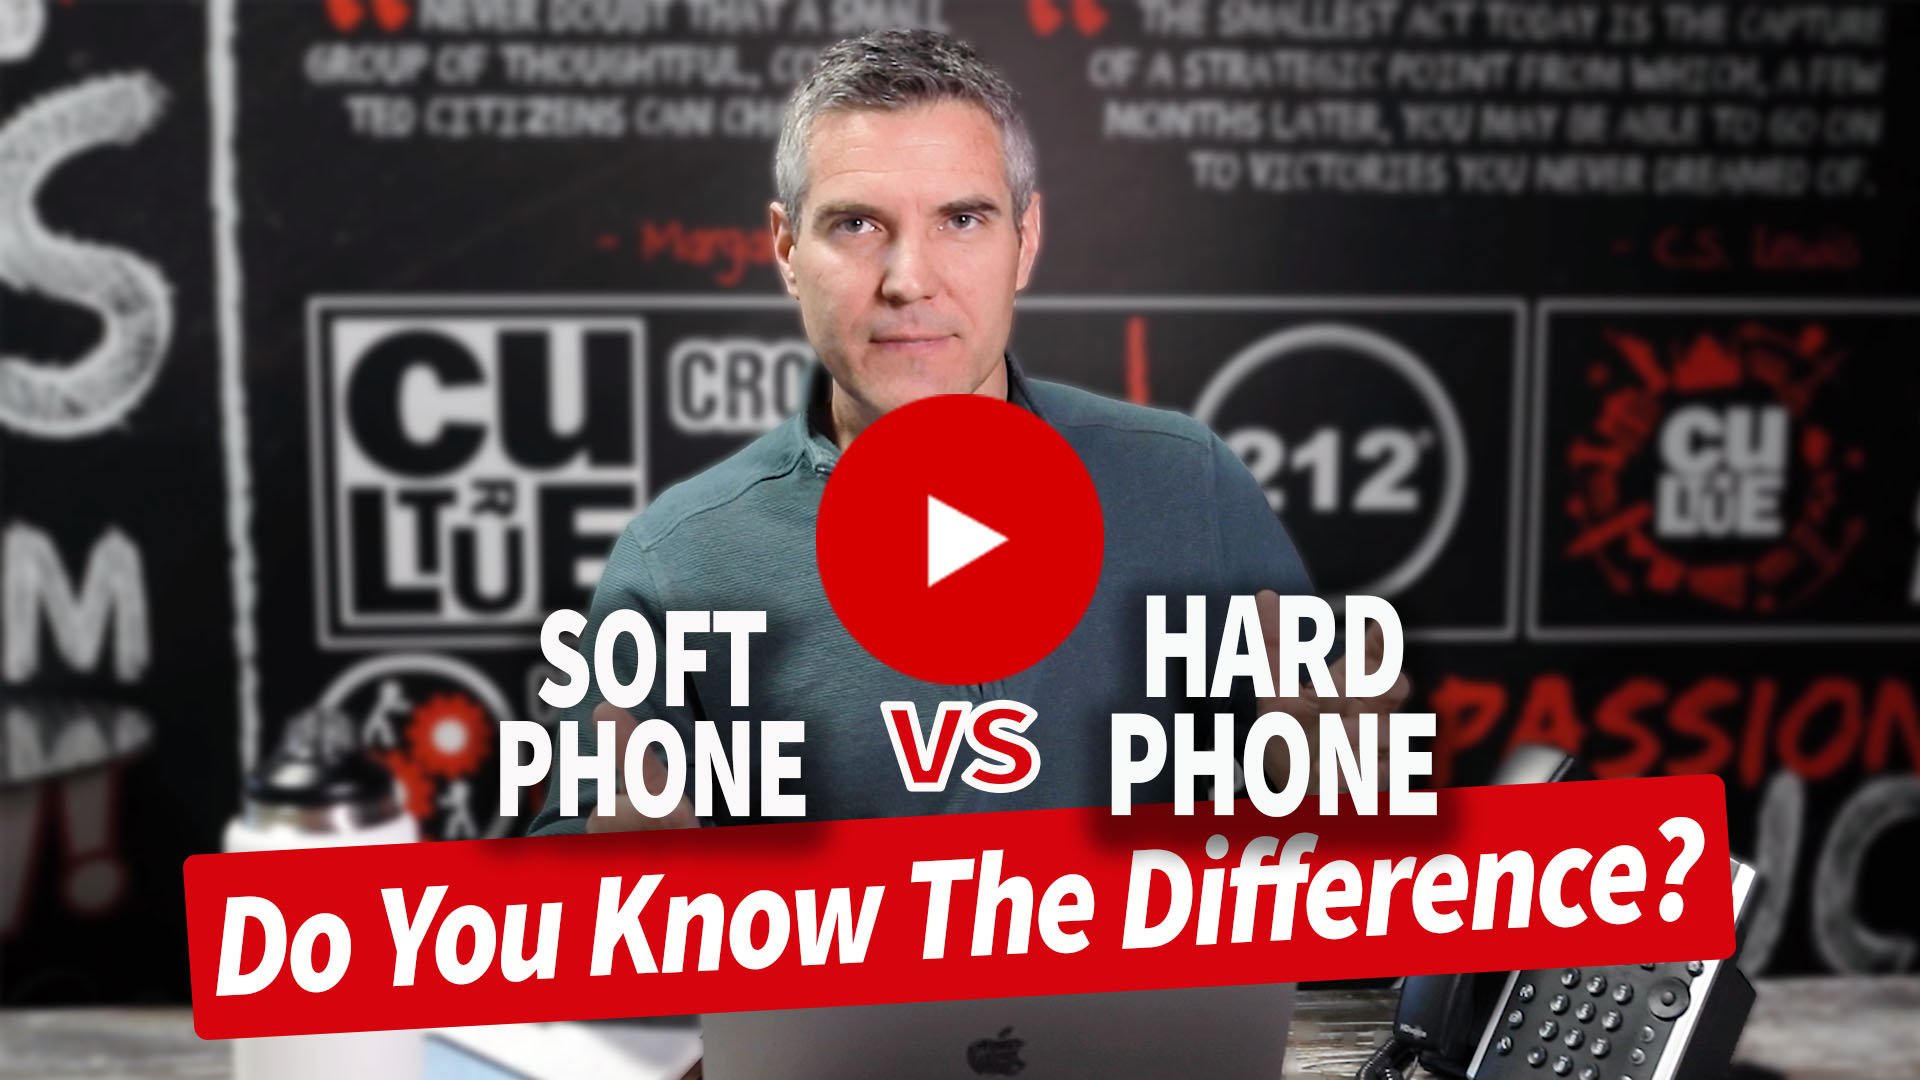 Hard Phone Vs Soft Phone: Do You know The Difference?